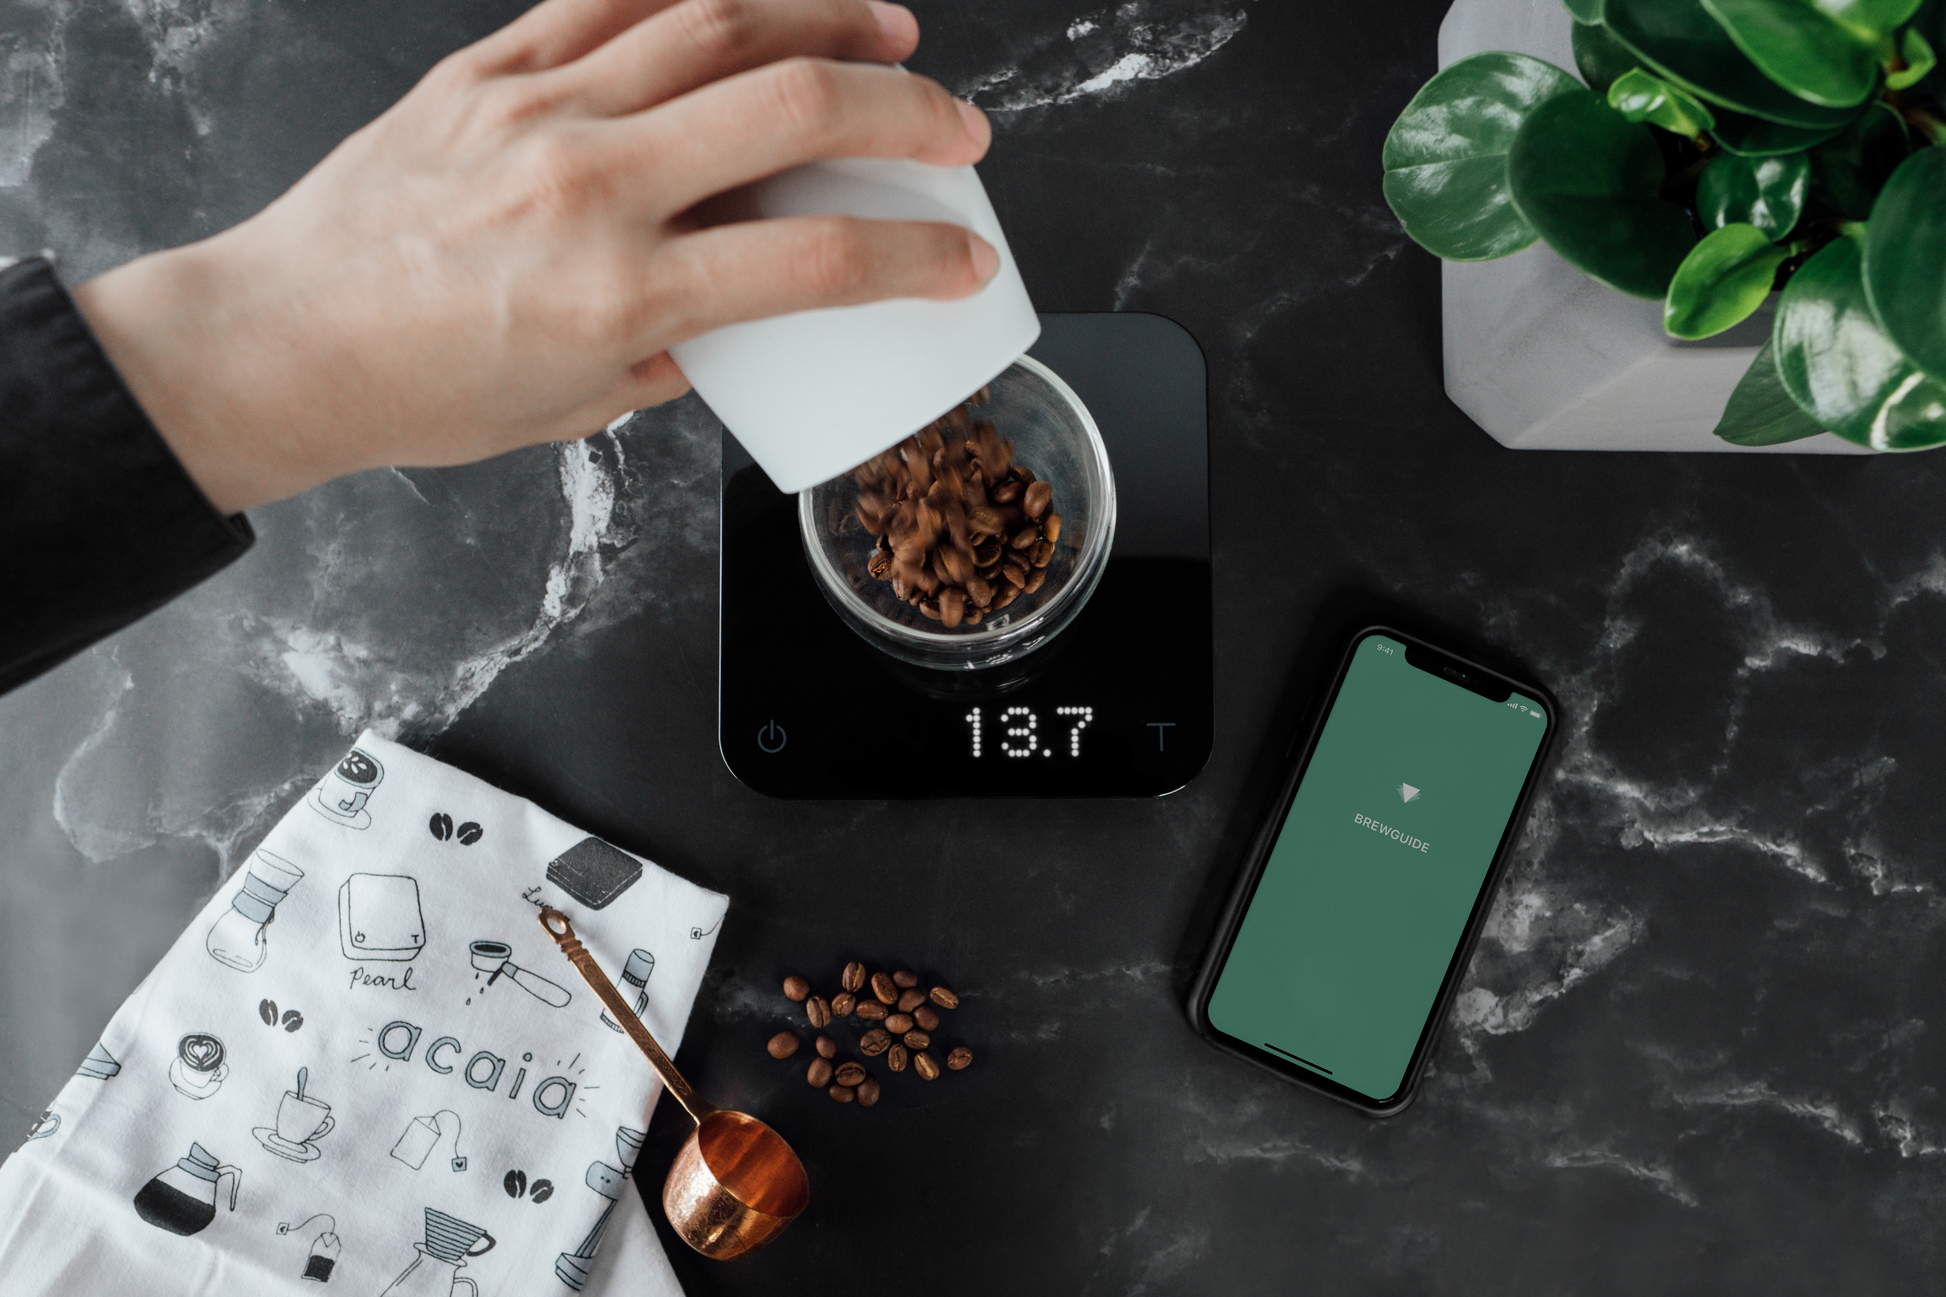 Acaia Pearl Coffee Scale in Pitch Black – Whole Latte Love